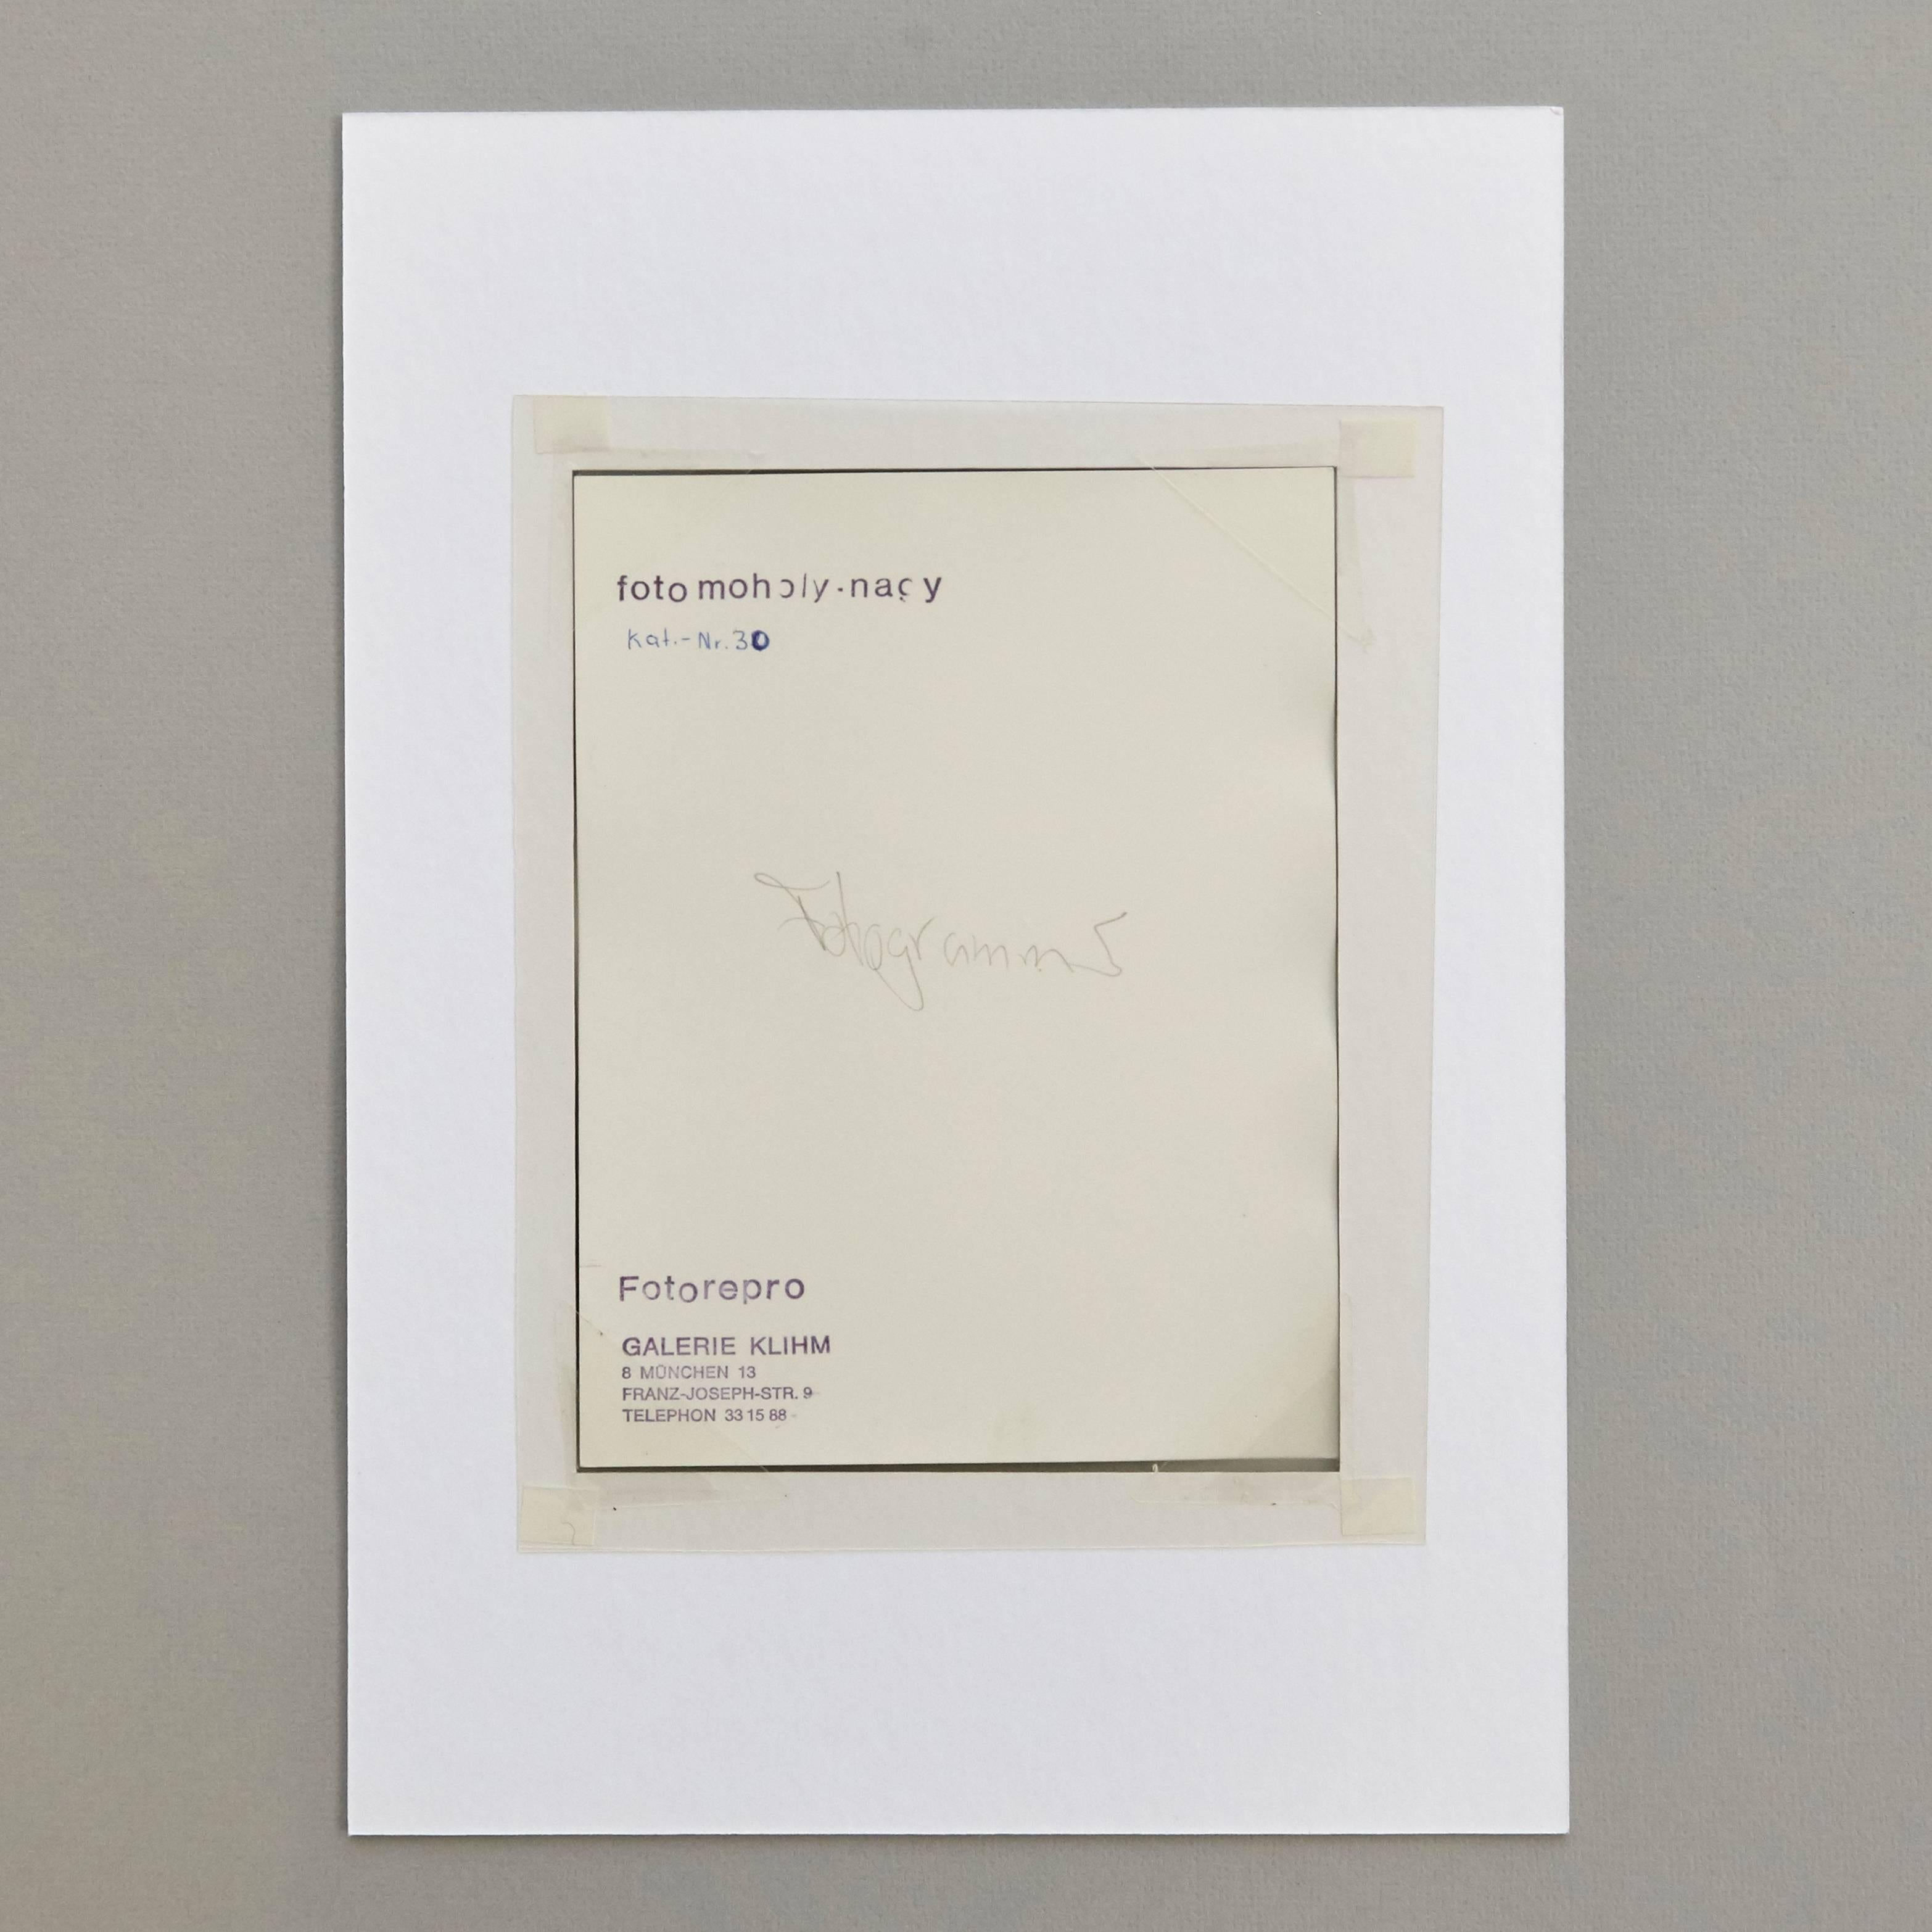 Photography by László Moholy-Nagy.

A posthumous print from the original negative, circa 1973
Stamped by Foto Moholy-Nagy and Galerie Khlim.

In original good condition.

László Moholy-Nagy (1895-1946) was a Hungarian painter and photographer